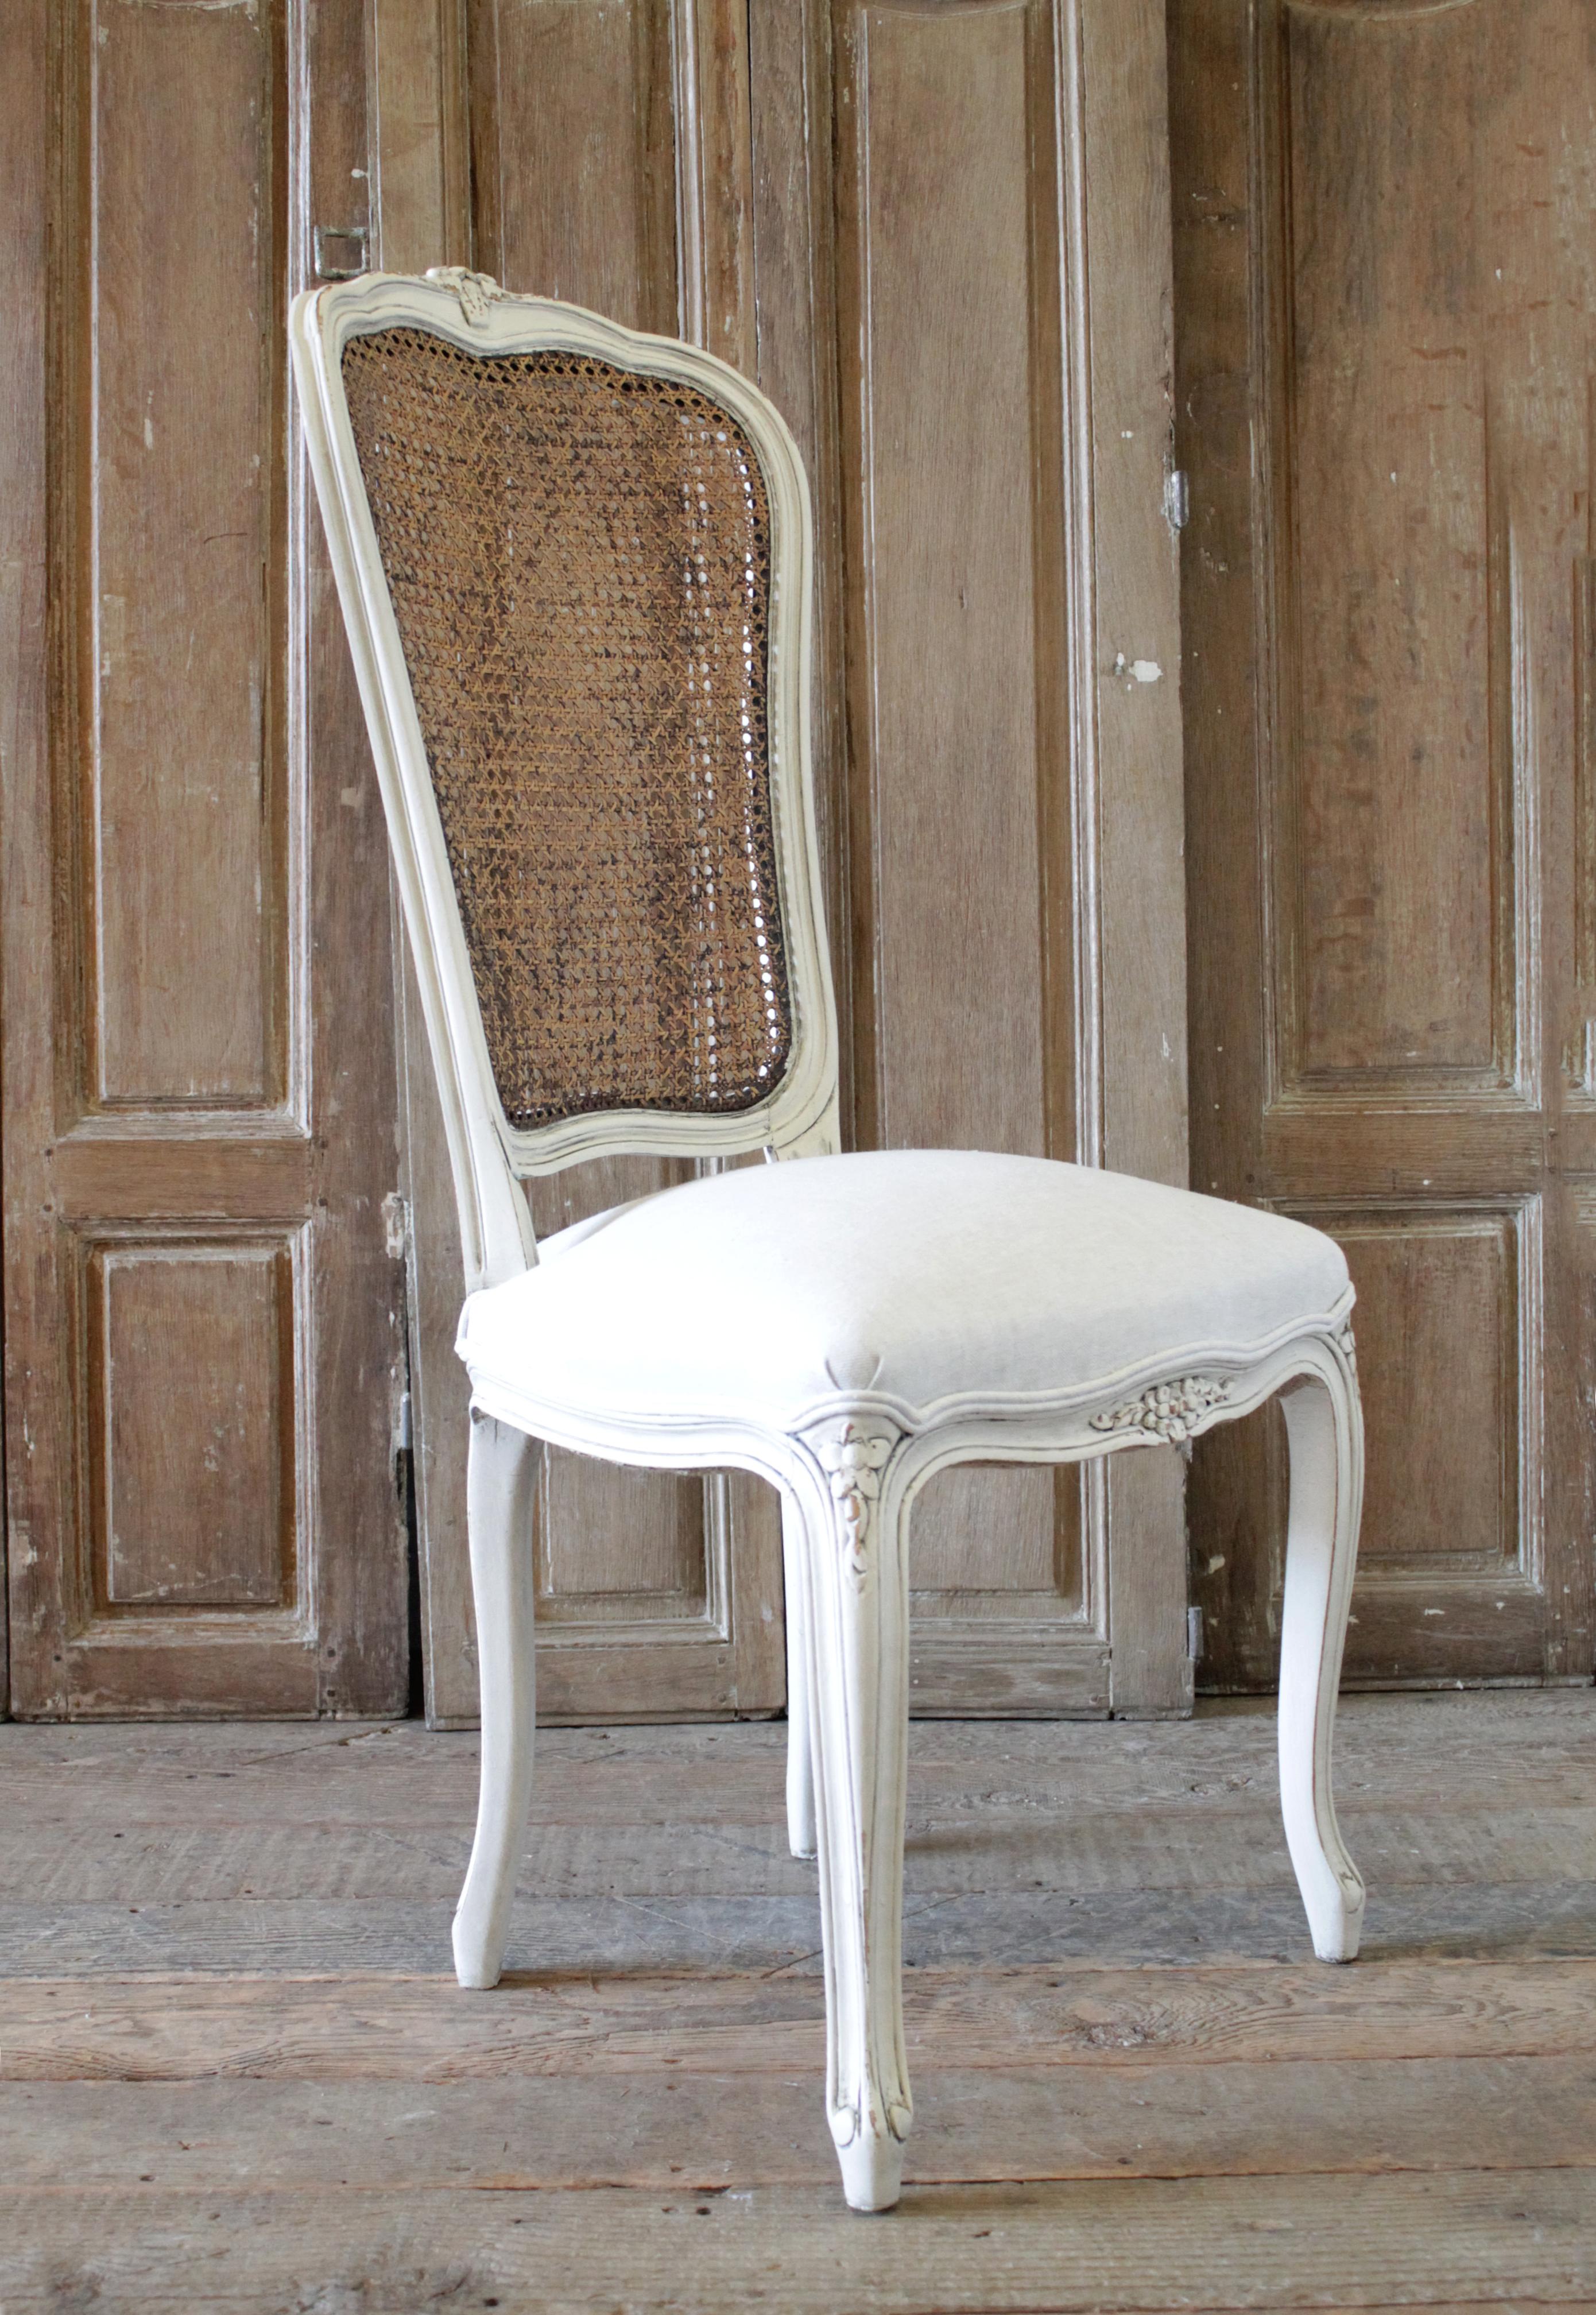 20th century French Country style cane back accent chair. Beautiful painted chair in our oyster white finish, with subtle distressed edges, and finished with an antique glazed patina. Great for a vanity chair or desk chair. Greige colored natural